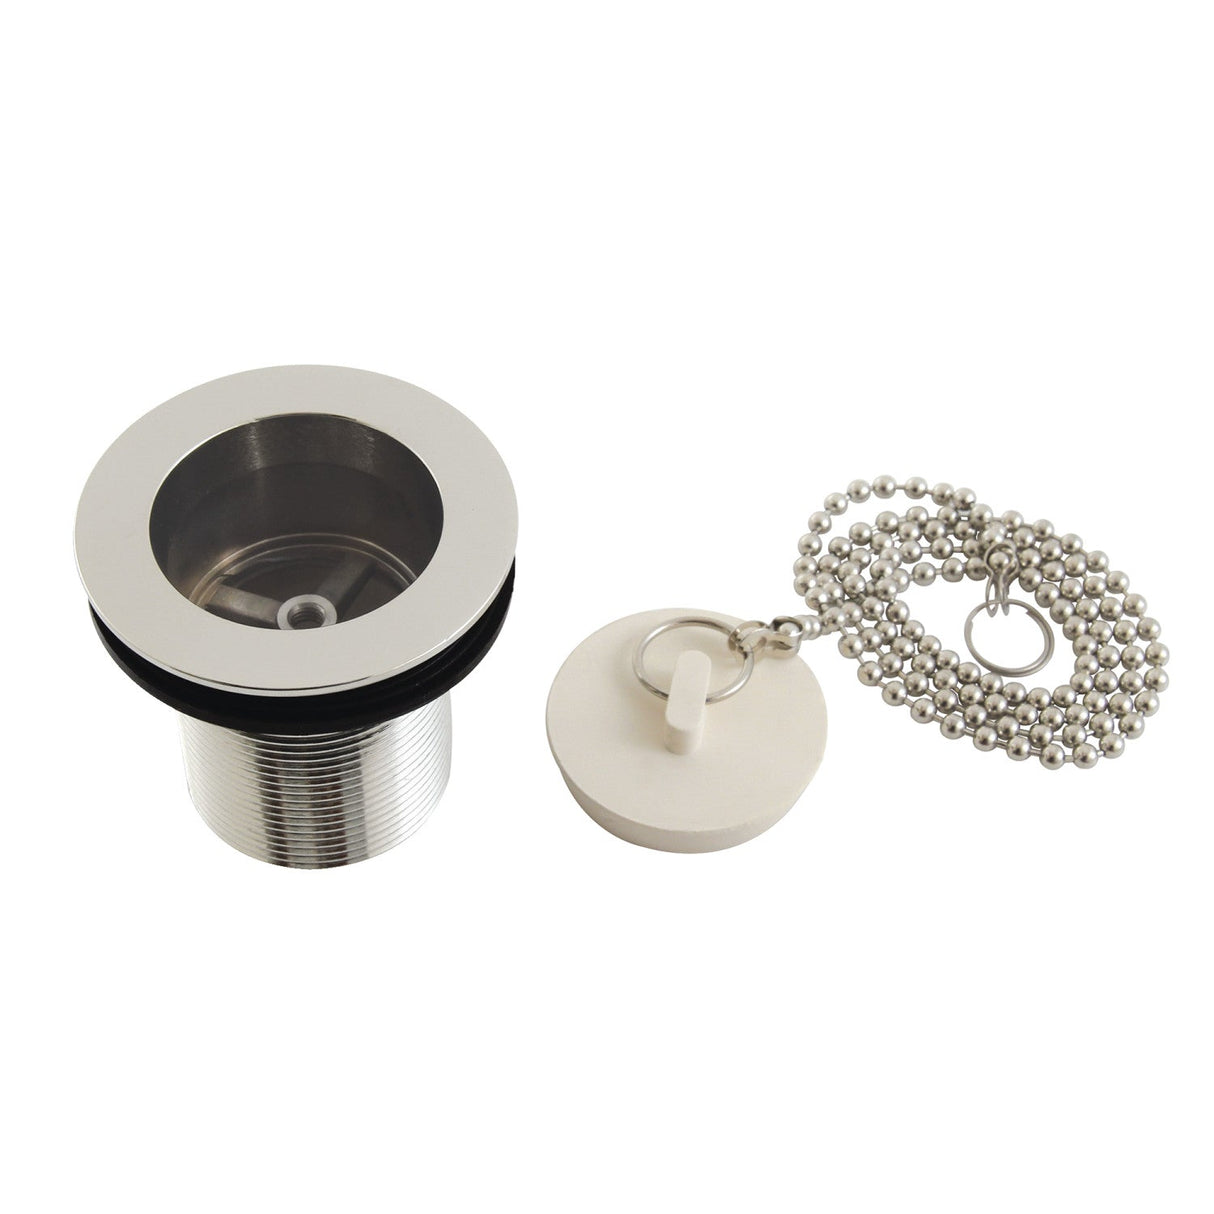 Made To Match DSP20PN 1-1/2-Inch Chain and Stopper Tub Drain with 2-Inch Body Thread, Polished Nickel